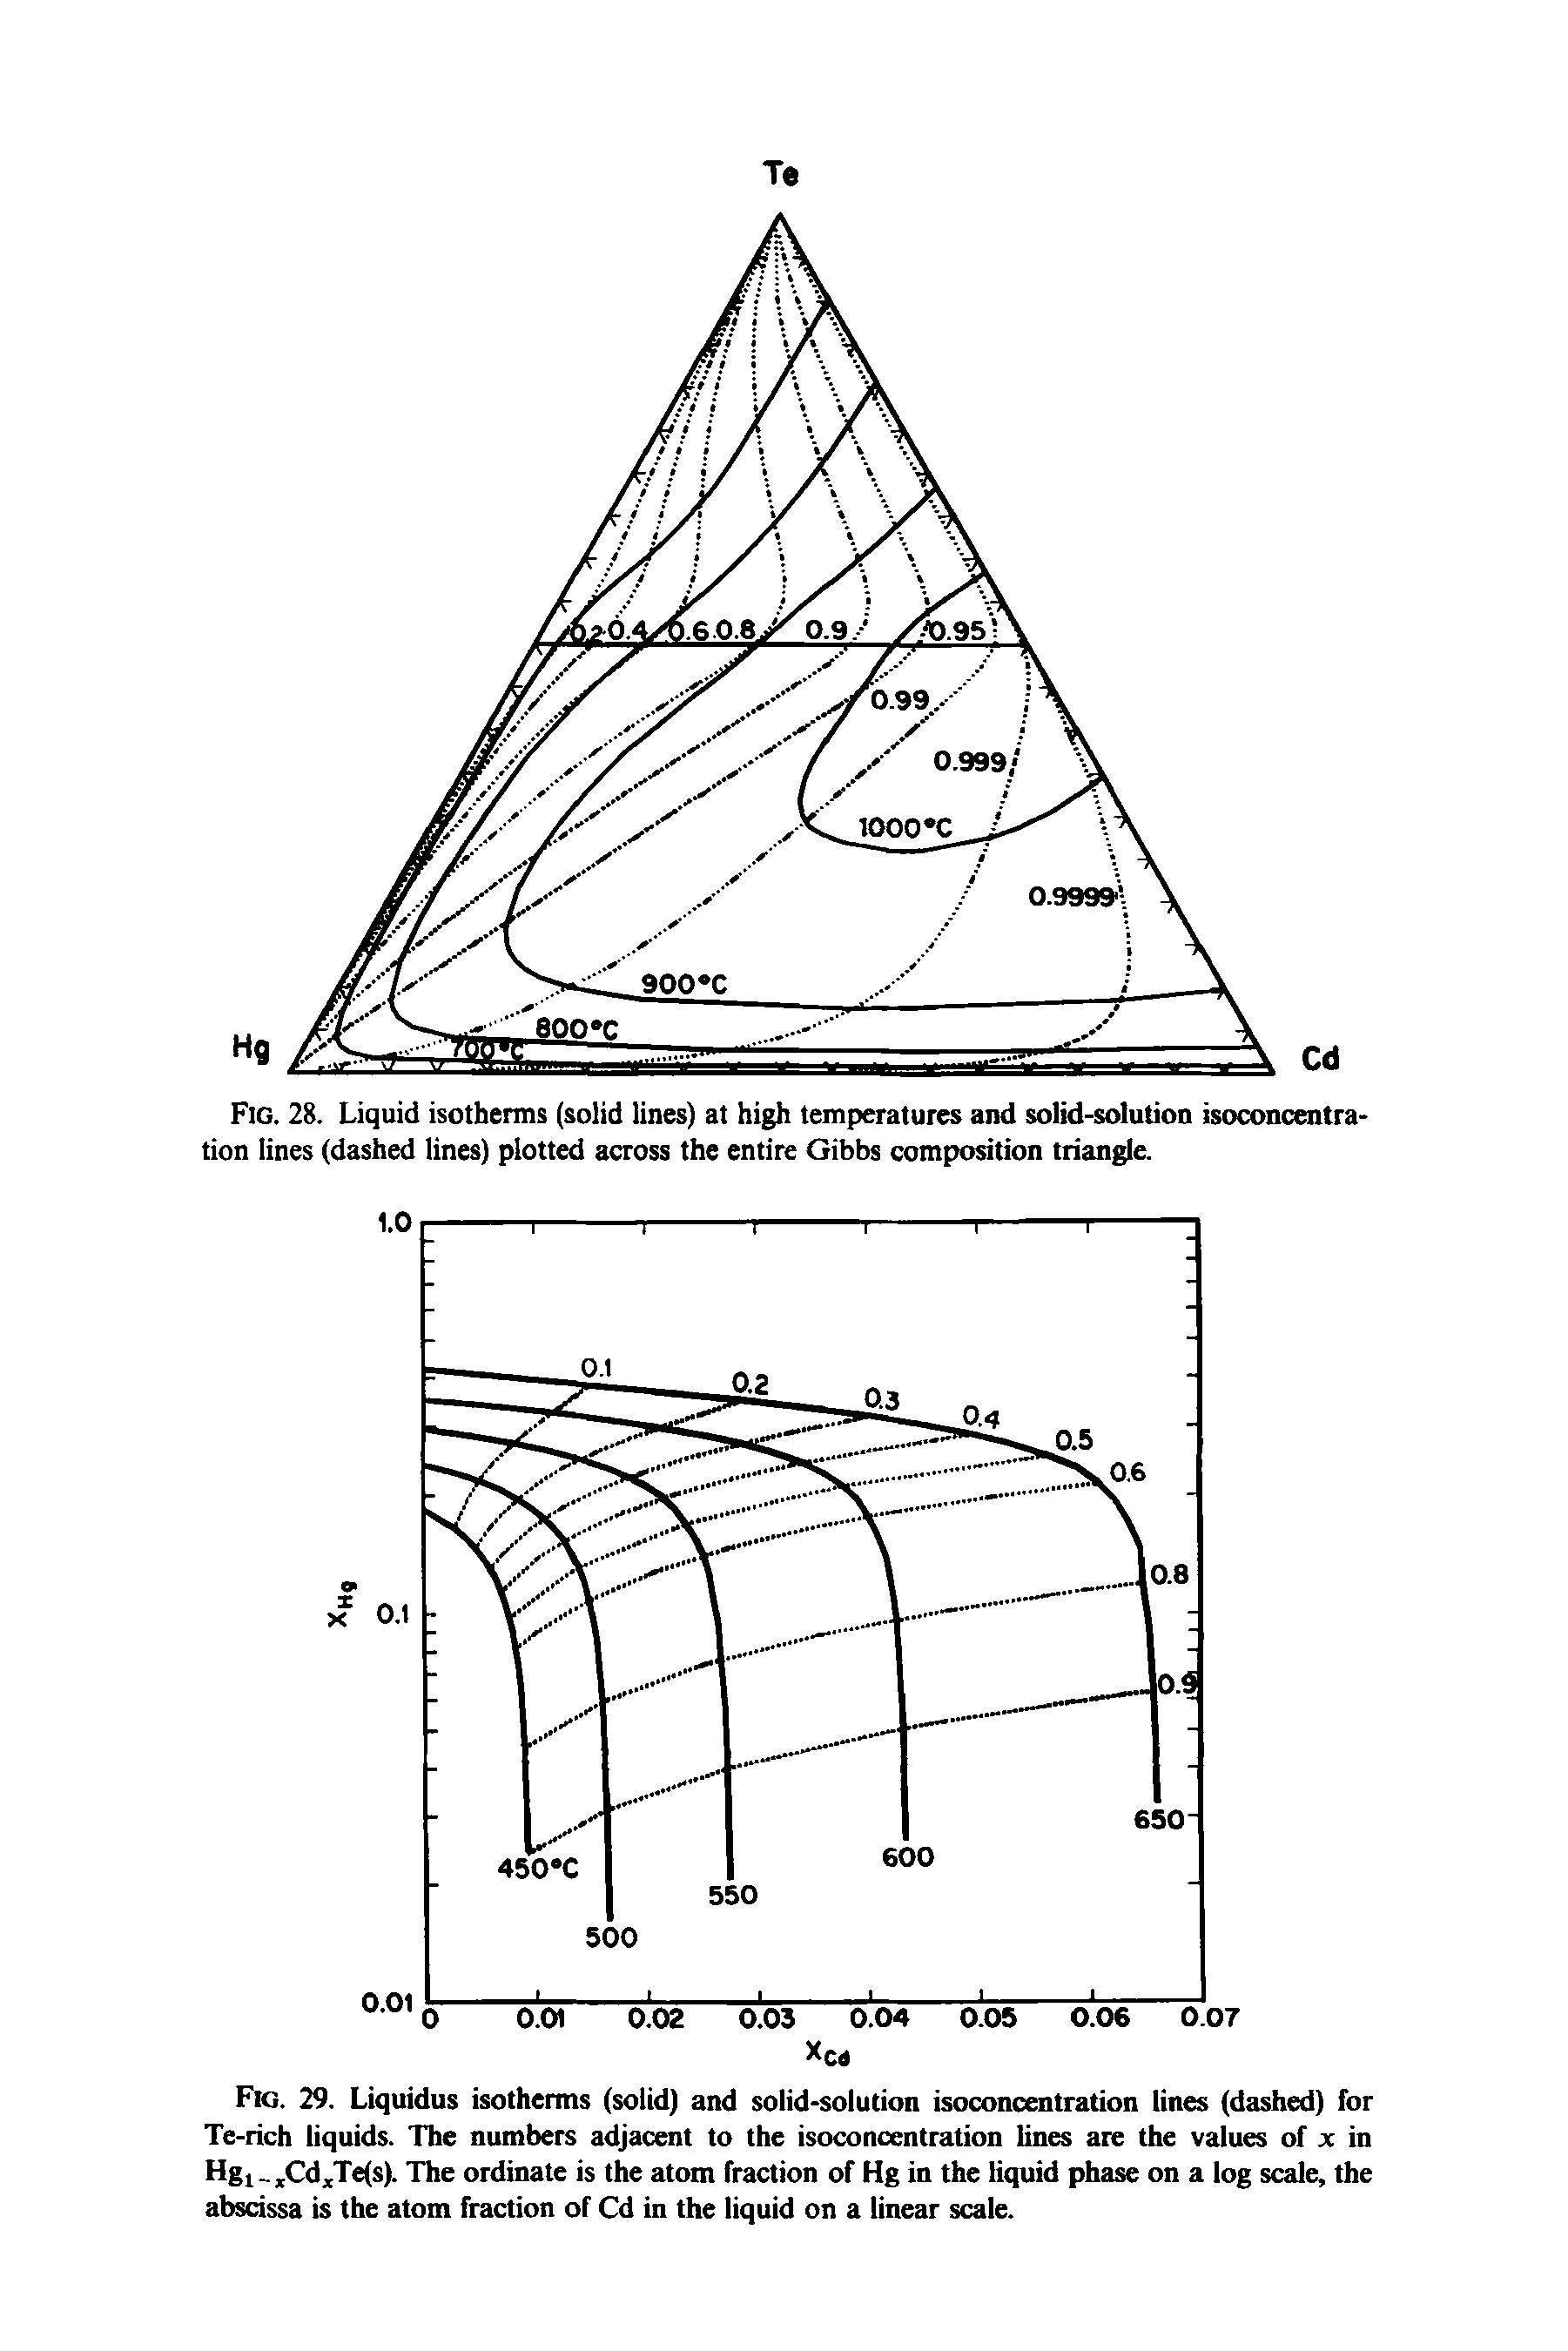 Fig. 29. Liquidus isotherms (solid) and solid-solution isoconcentration lines (dashed) for -rich liquids. The numbers adjacent to the isoconcentration lines are the values of x in Hgl jtCdxTe(s). The ordinate is the atom fraction of Hg in the liquid phase on a log scale, the abscissa is the atom fraction of Cd in the liquid on a linear scale.